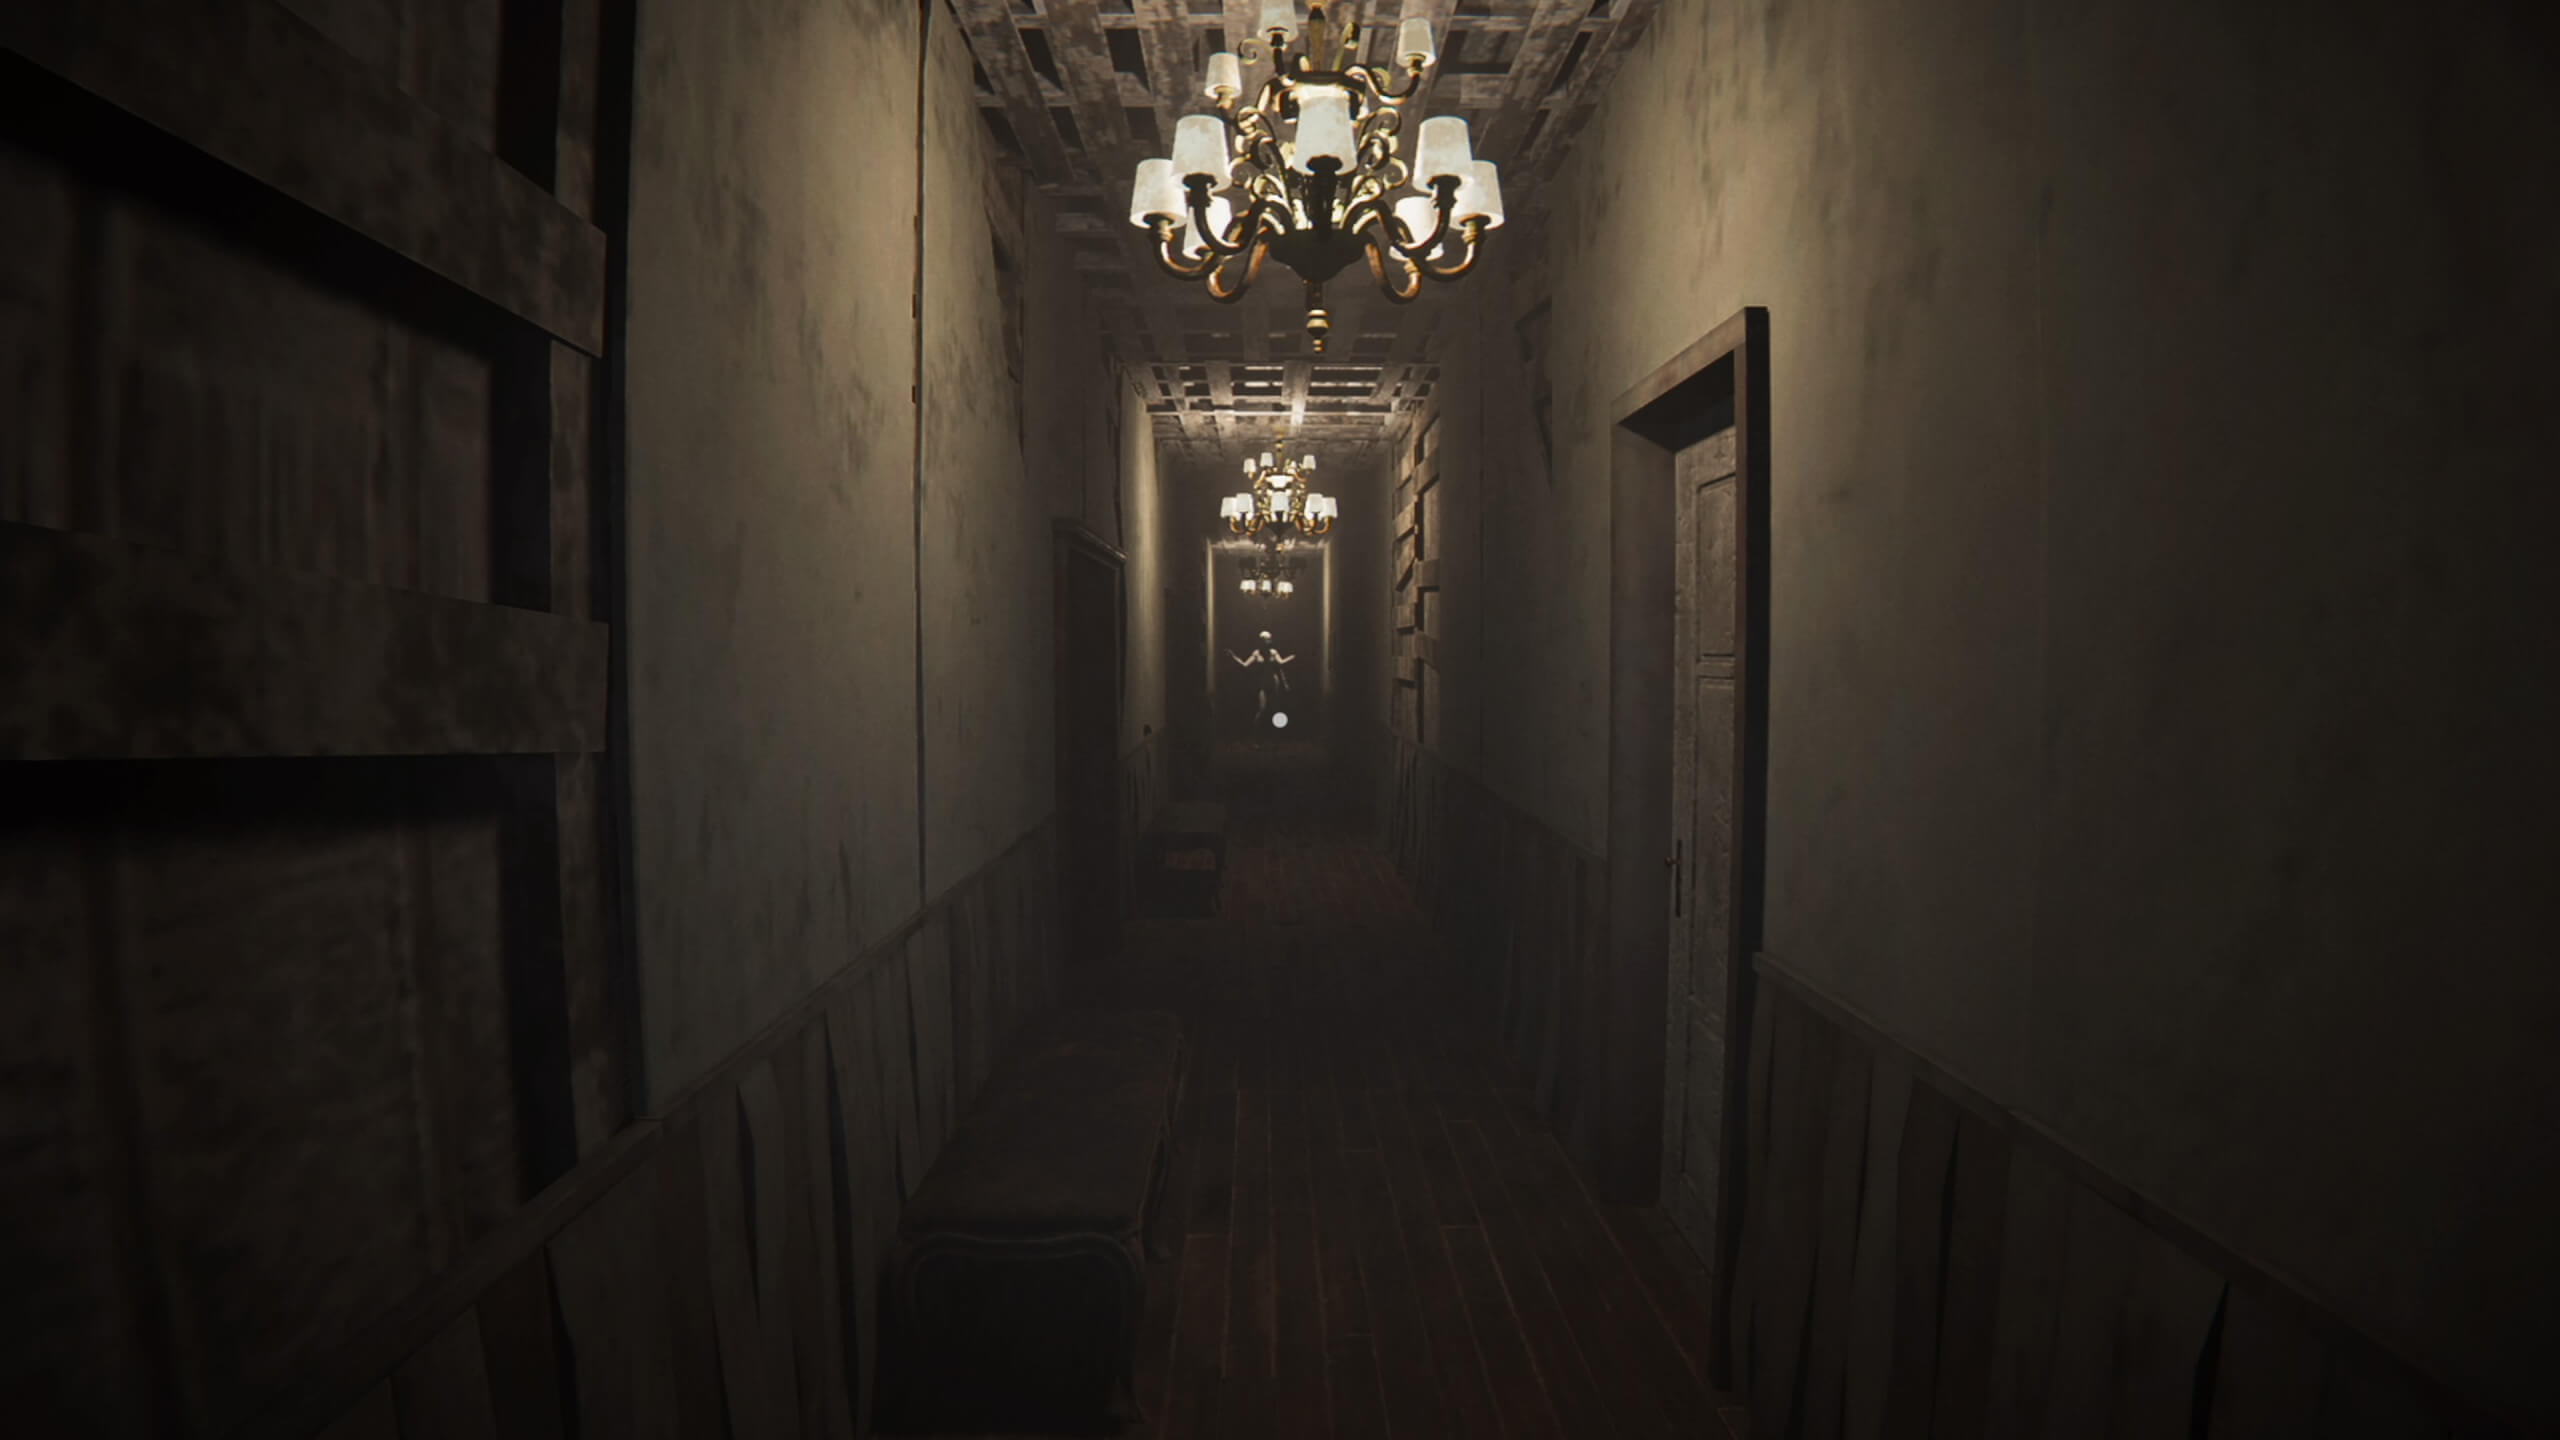 A dimly lit shabby corridor. On the ceiling are three small chandeliers spaced out from each other going vertically. At the end of the corridor is a mannequin with multiple arms. 